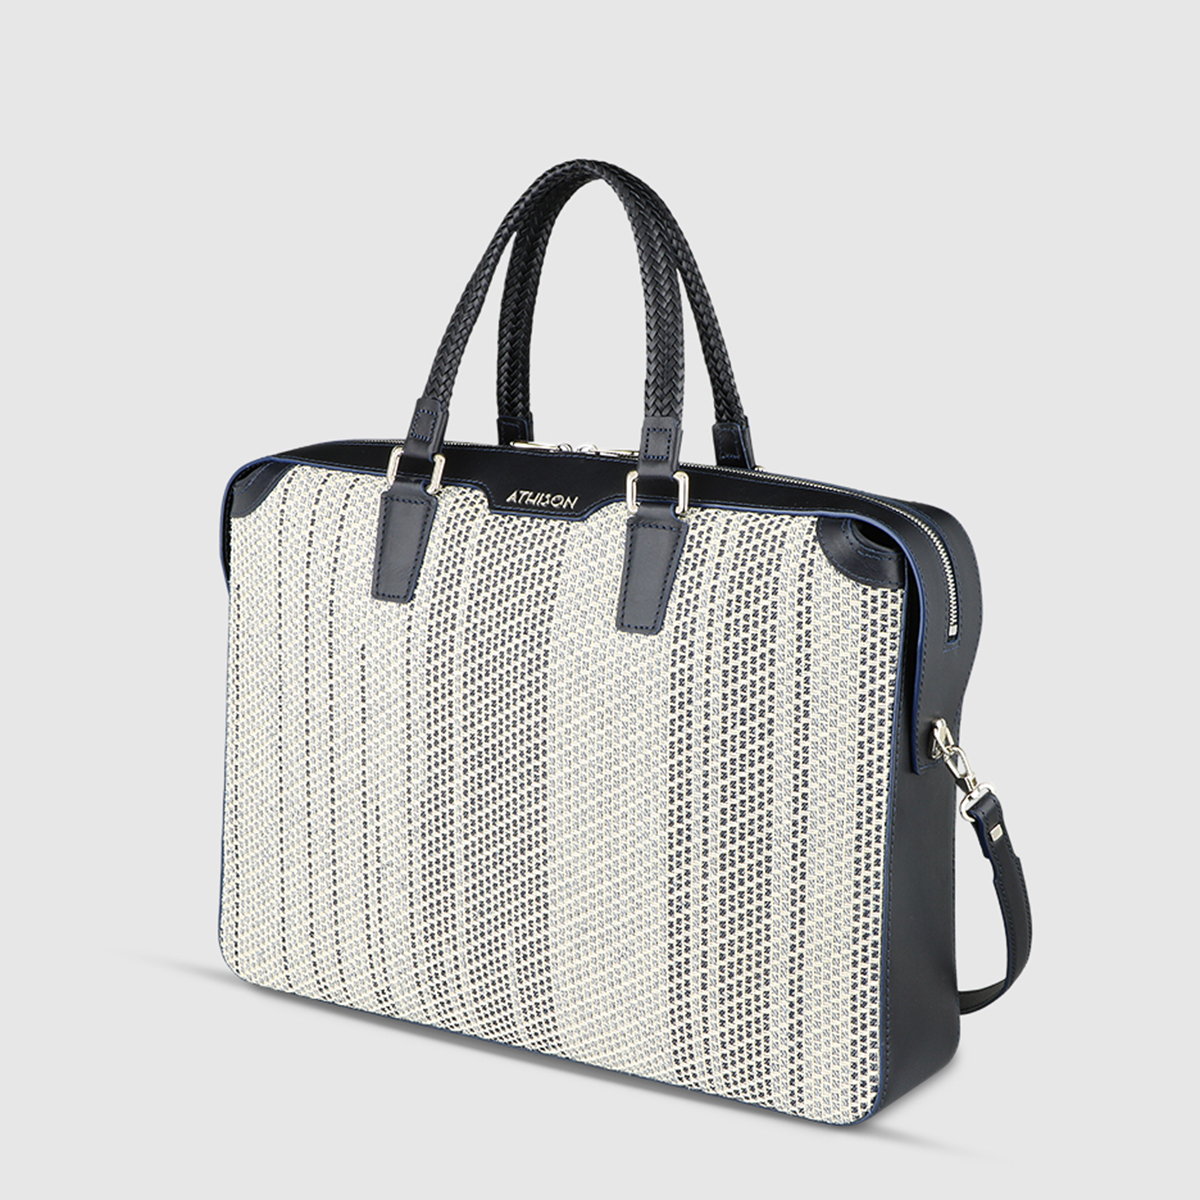 Athison White/Blue Leather Bag Athison on sale 2022 2